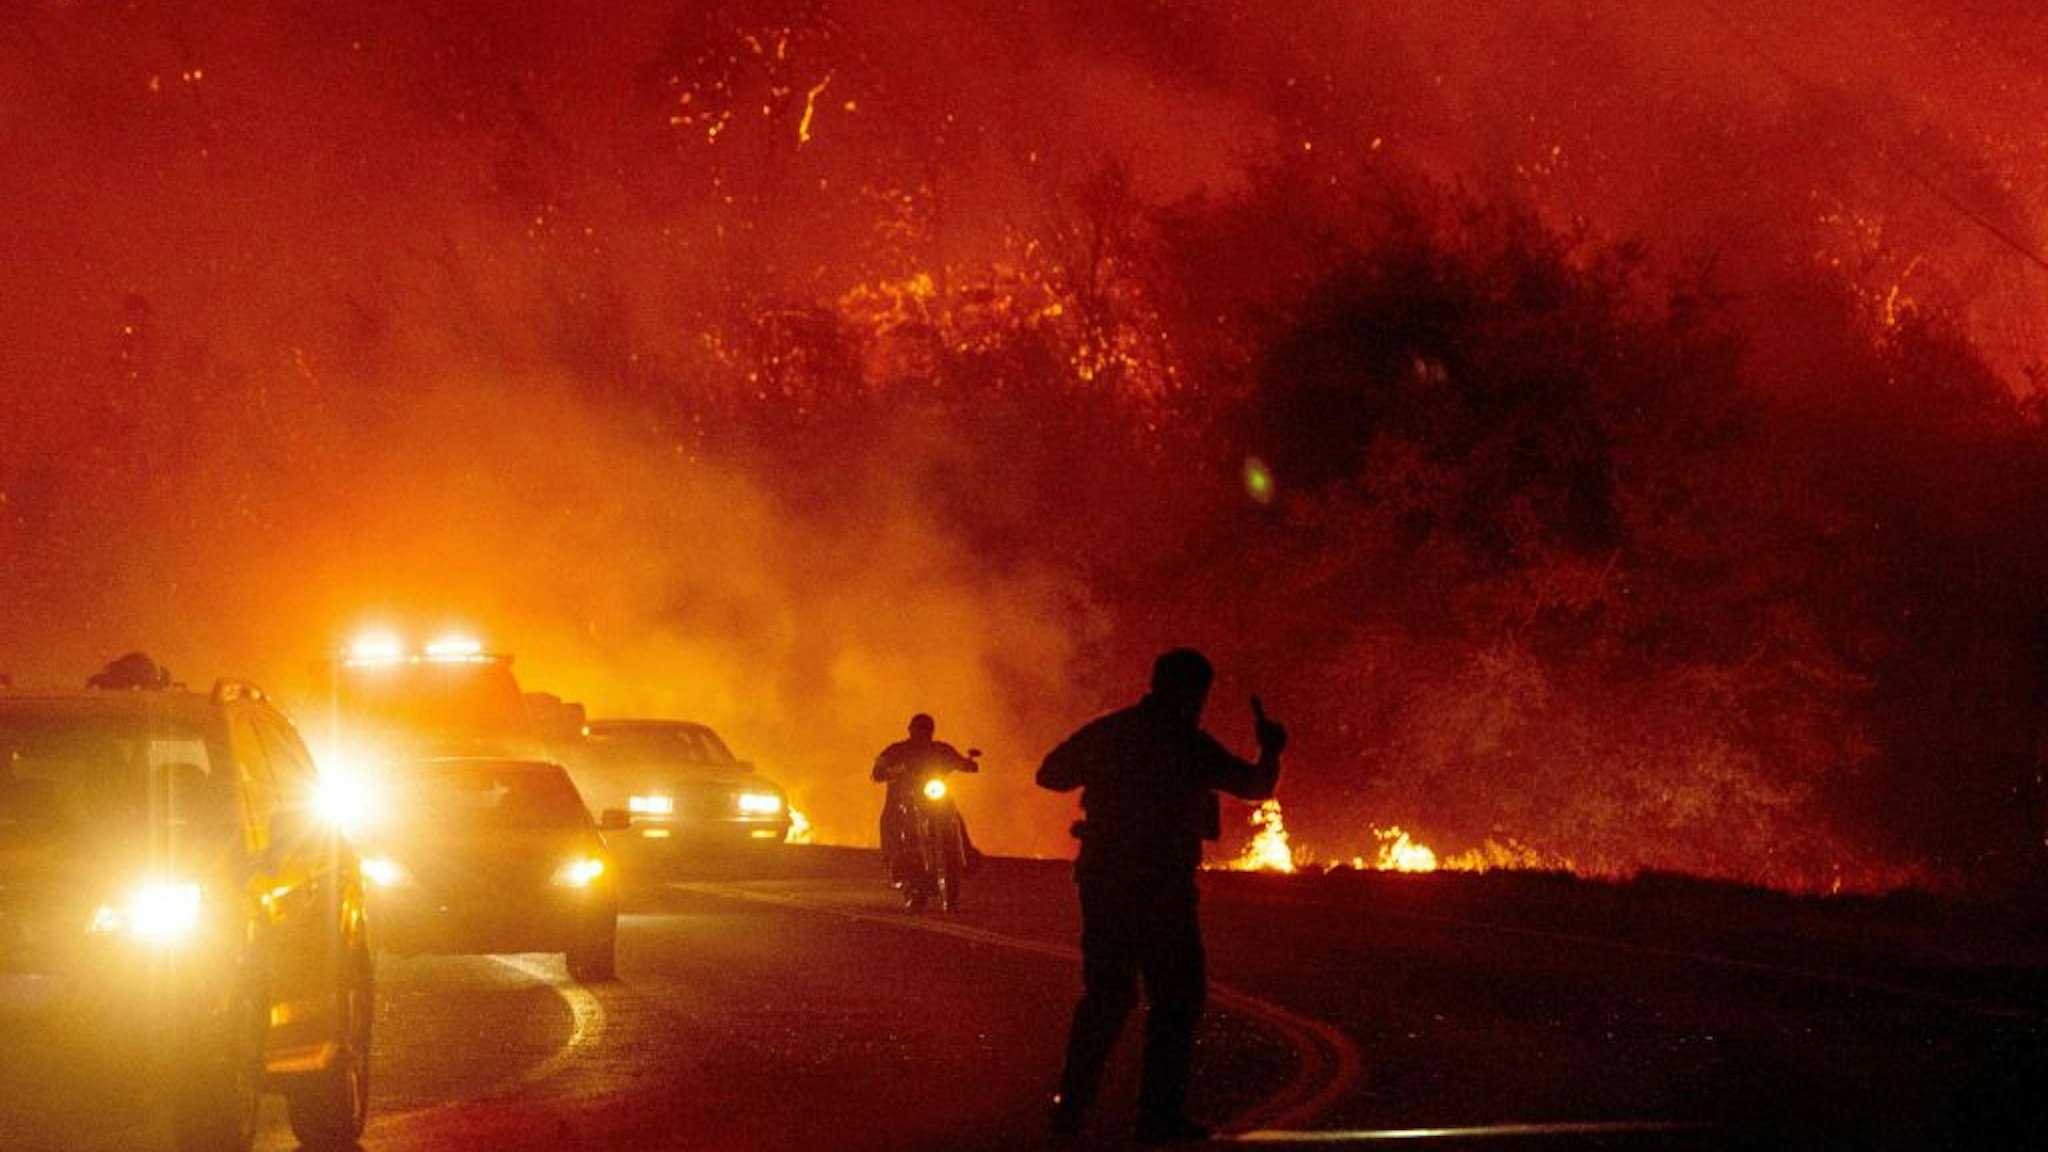 A law enforcement officer guides evacuees down a road surrounded by fire at the Bear fire in Oroville, California on September 9, 2020. - Dangerous dry winds whipped up California's record-breaking wildfires and ignited new blazes, as hundreds were evacuated by helicopter and tens of thousands were plunged into darkness by power outages across the western United States.